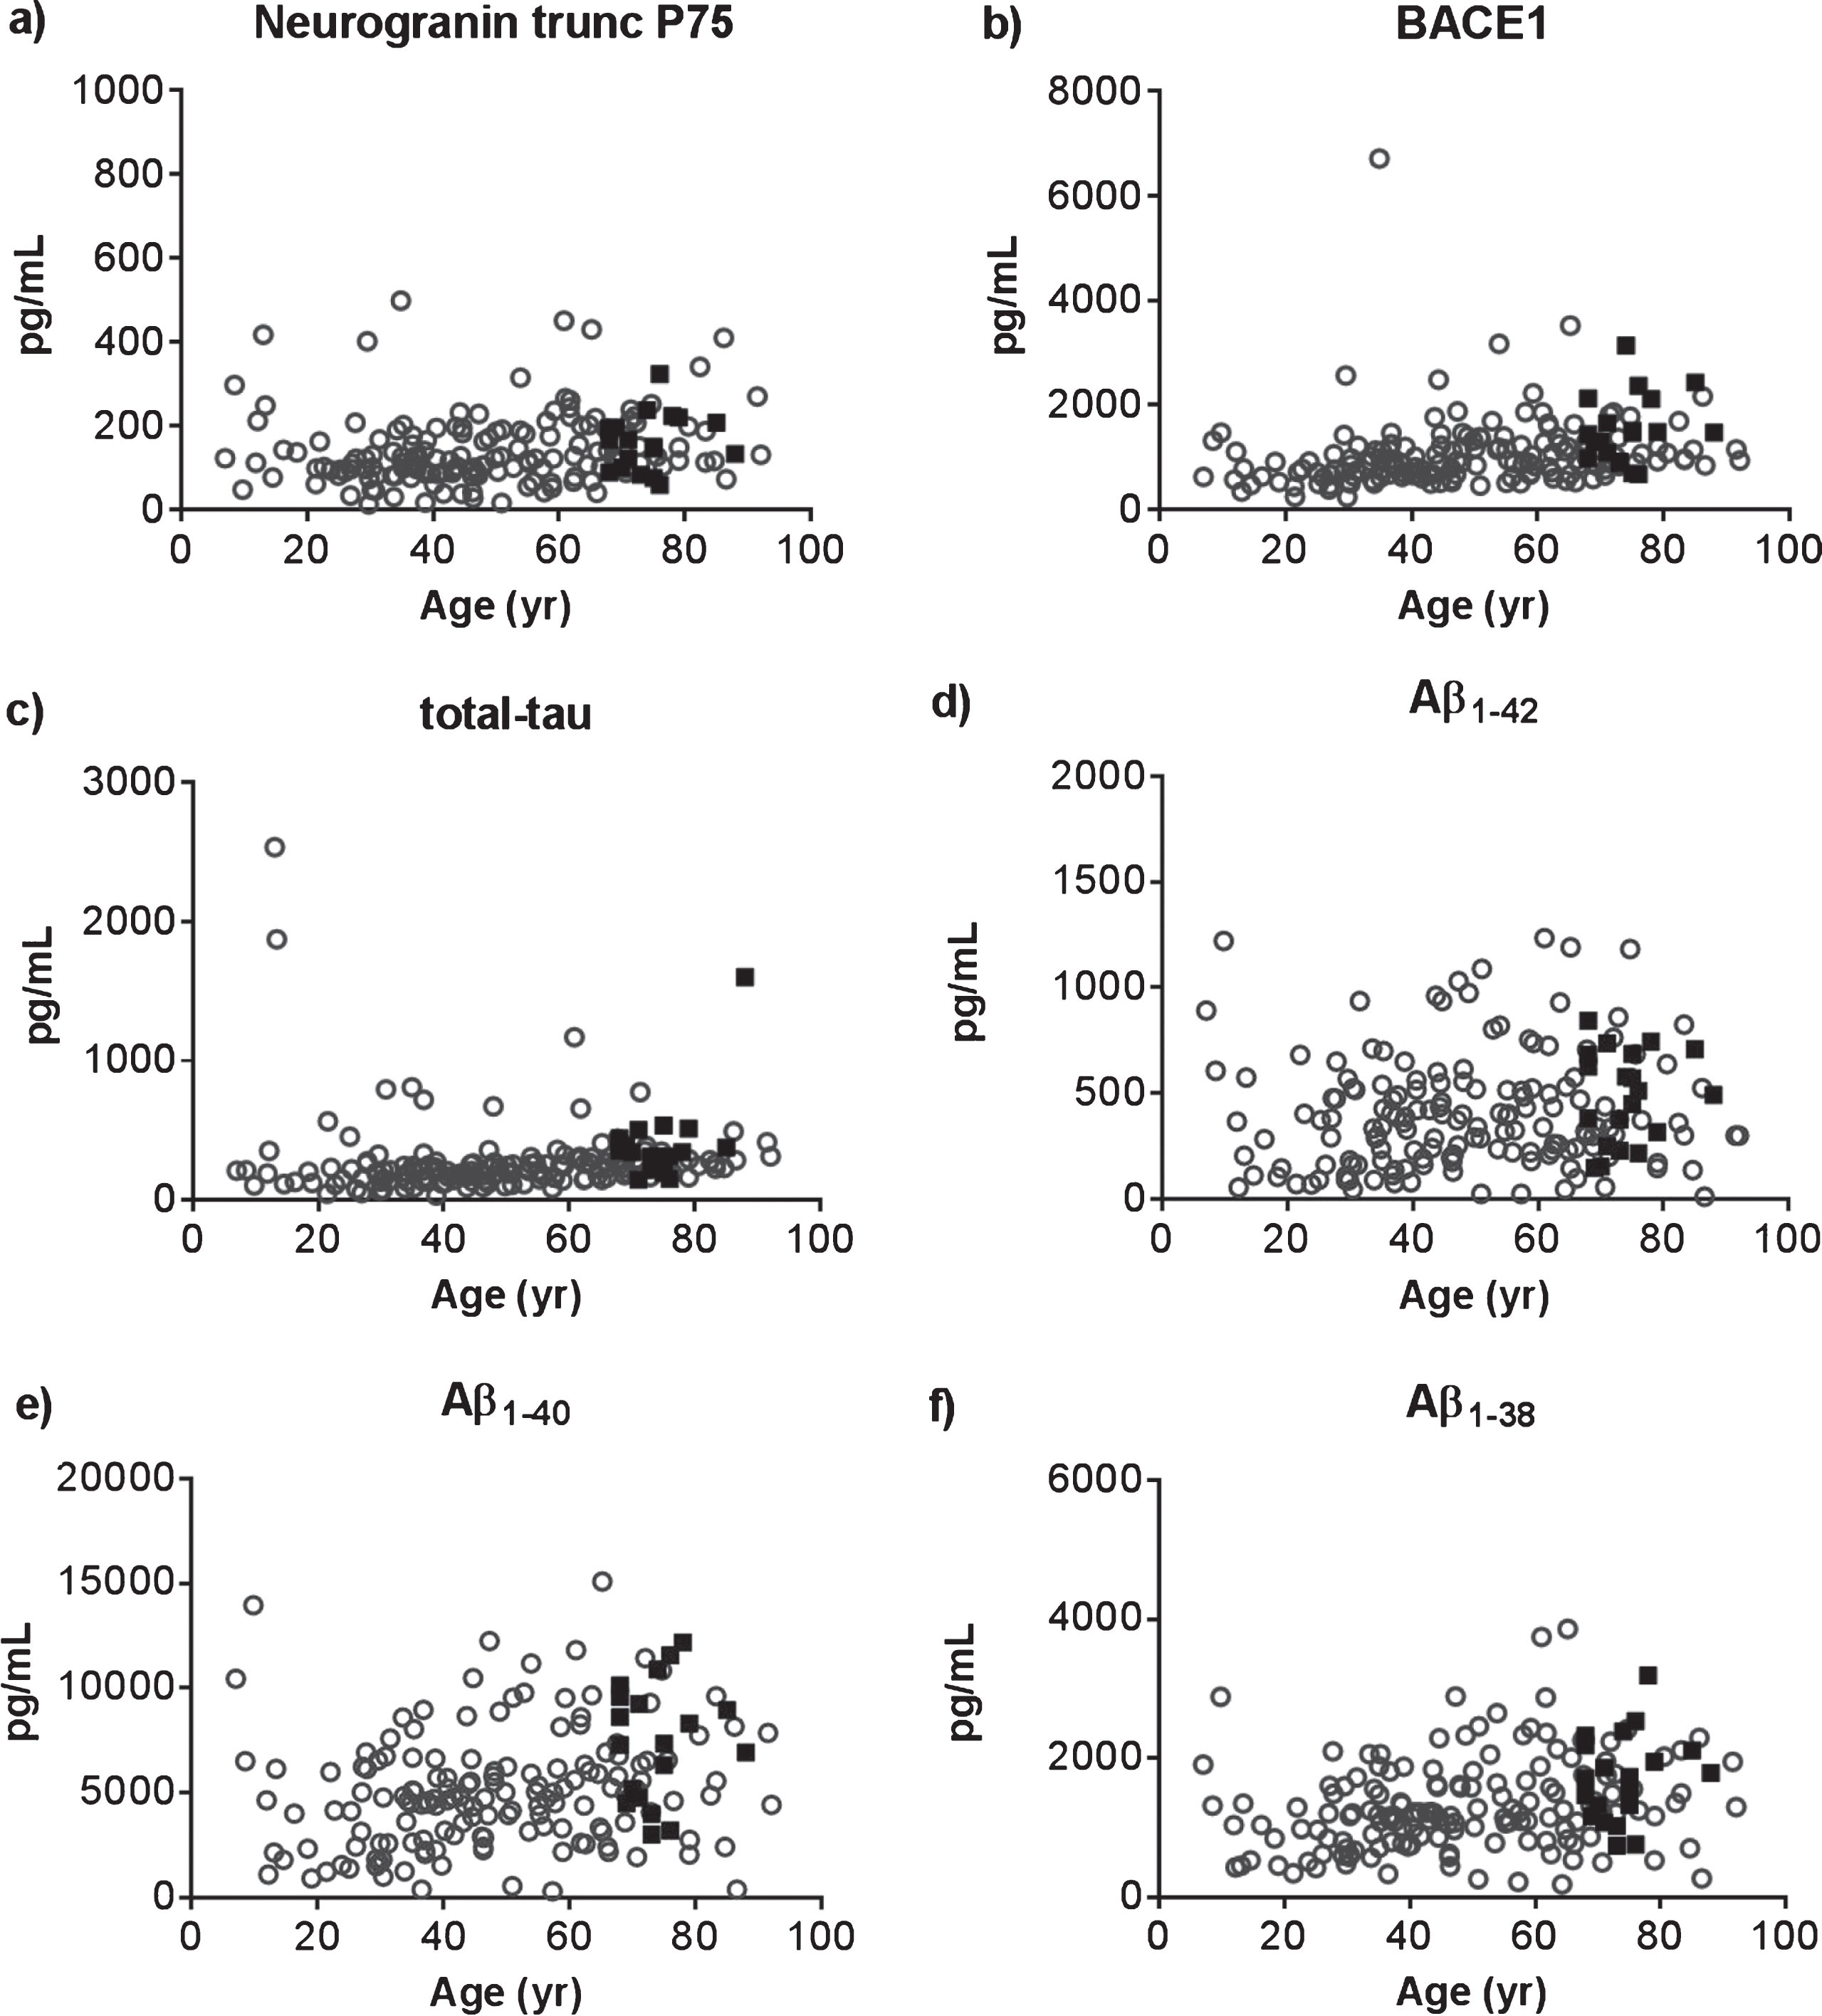 CSF levels of neurogranin trunc P75 (a), BACE1 (b), total-tau (c), Aβ1-42 (d), Aβ1-40 (e), and Aβ1-38 (f) in 20 cognitively healthy persons (black boxes) and 161 unselected CSF samples within a wide age-range (open circles) were plotted against age.